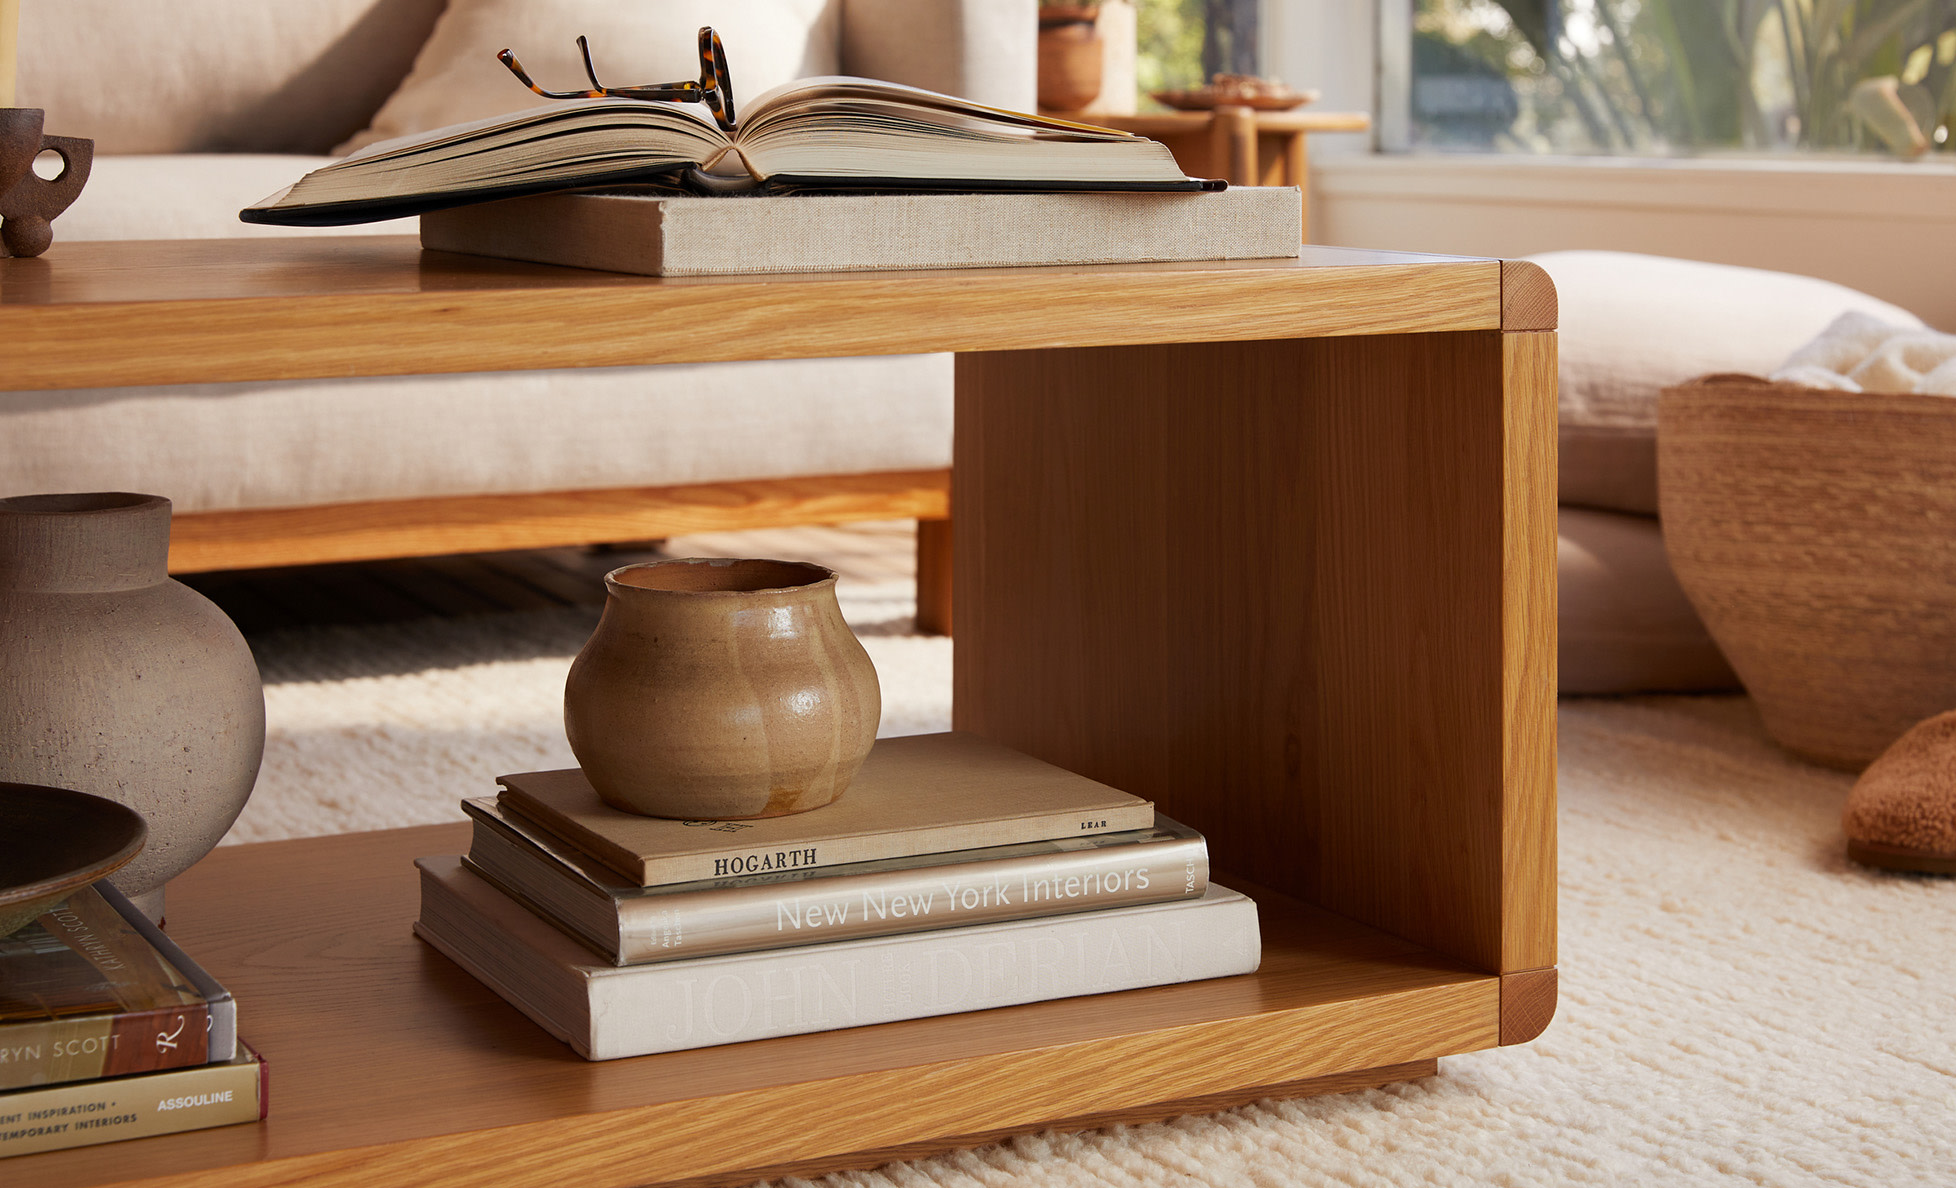 A white oak coffee table with decorative books and accessories stacked inside